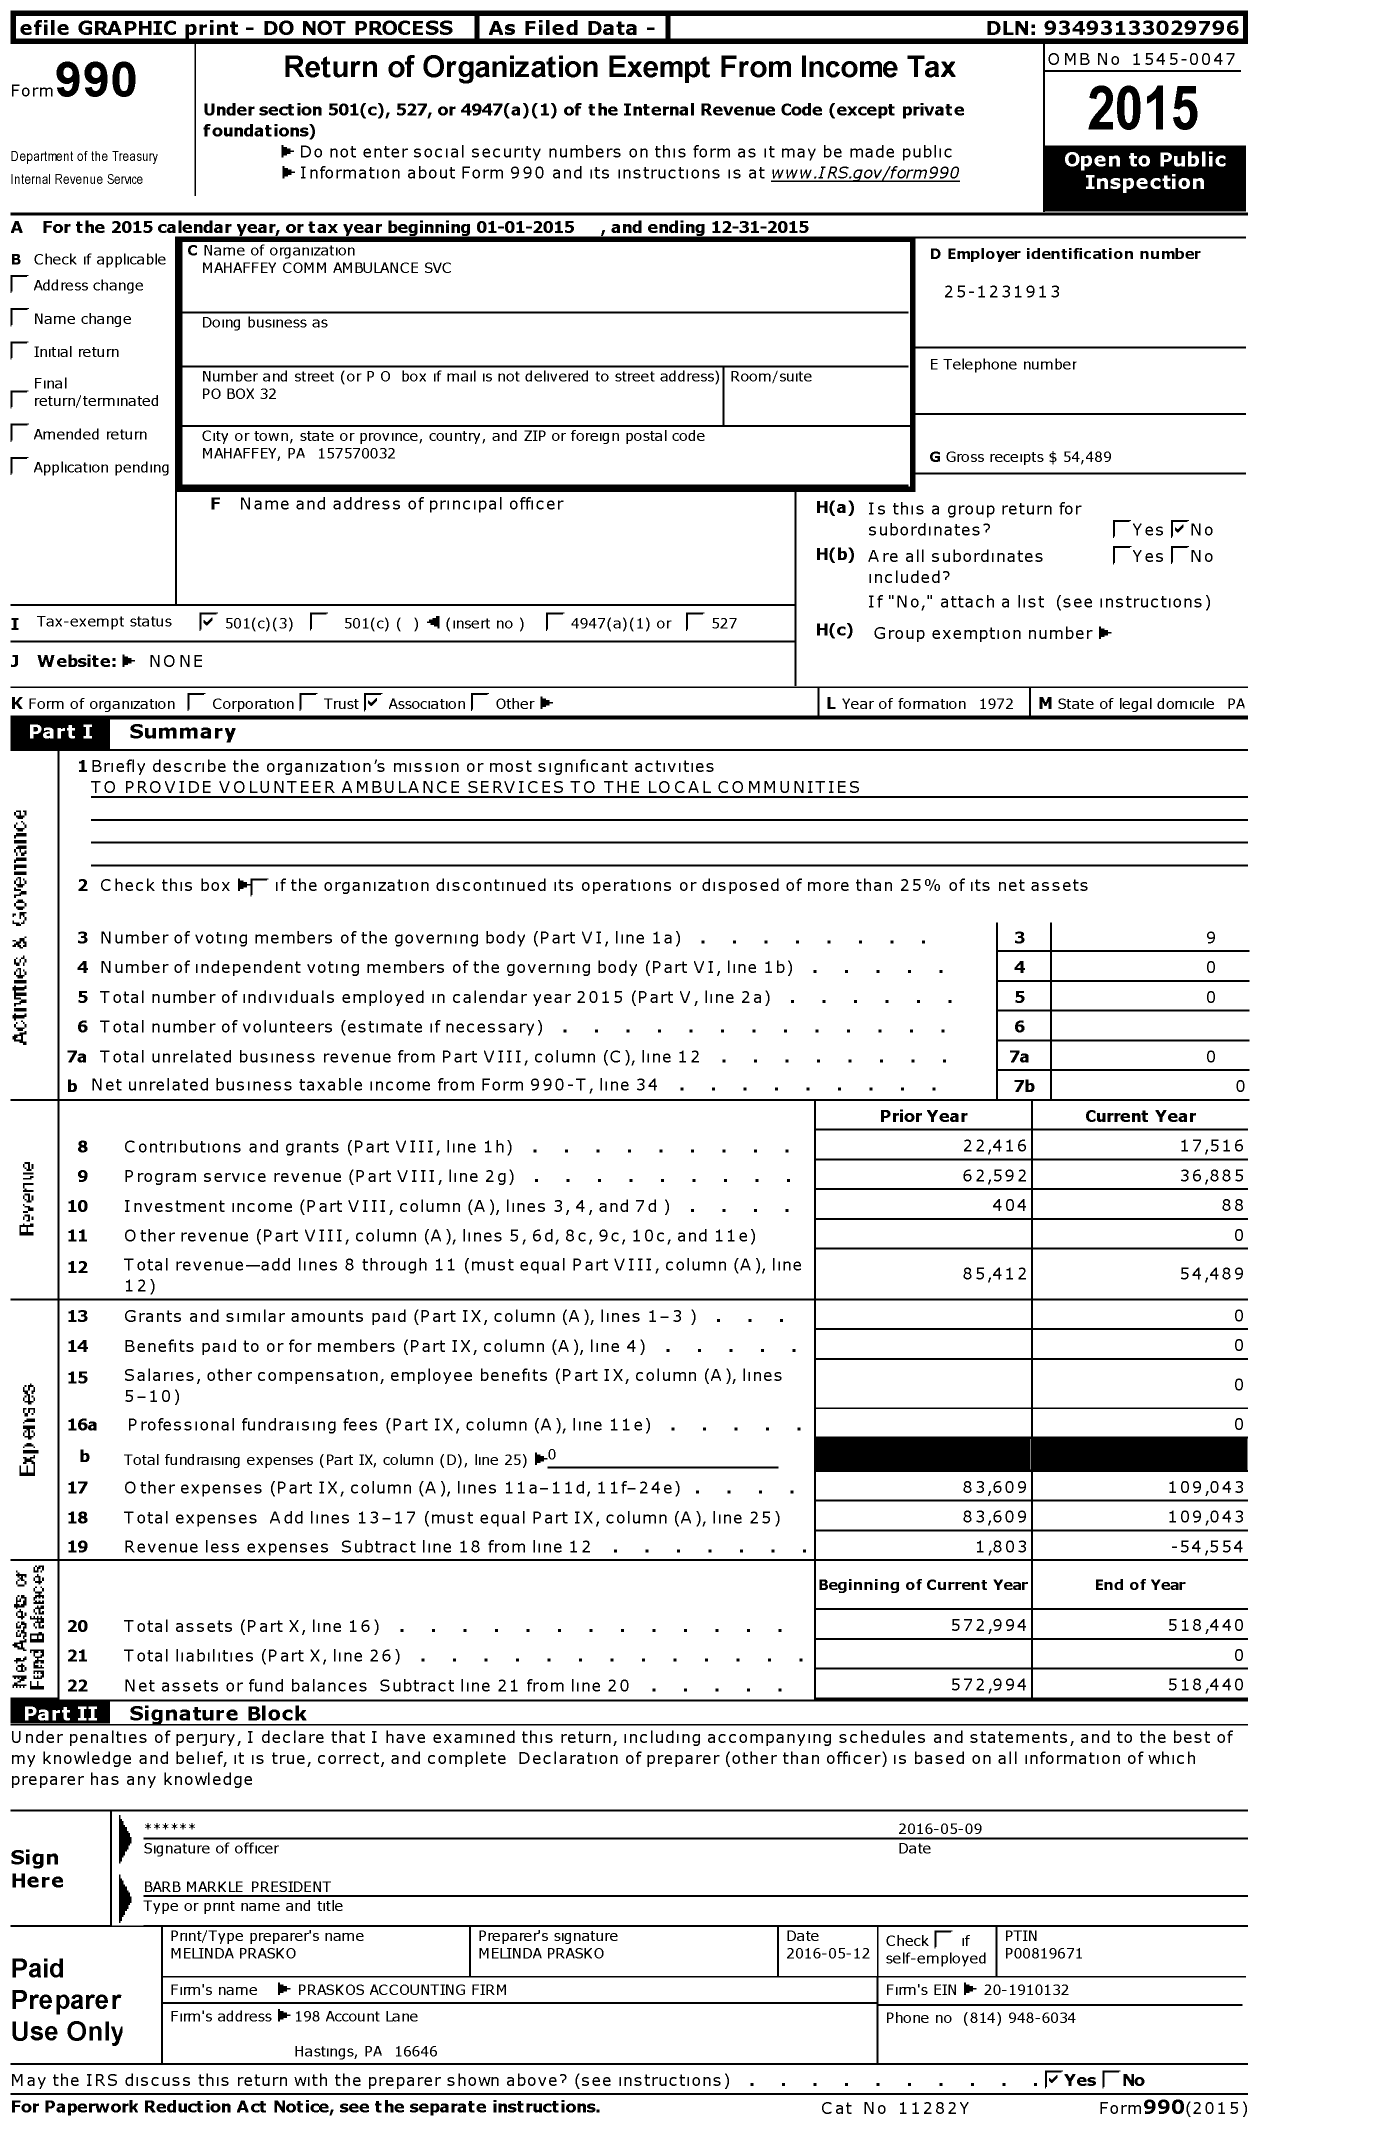 Image of first page of 2015 Form 990 for Mahaffey Comm Ambulance Service